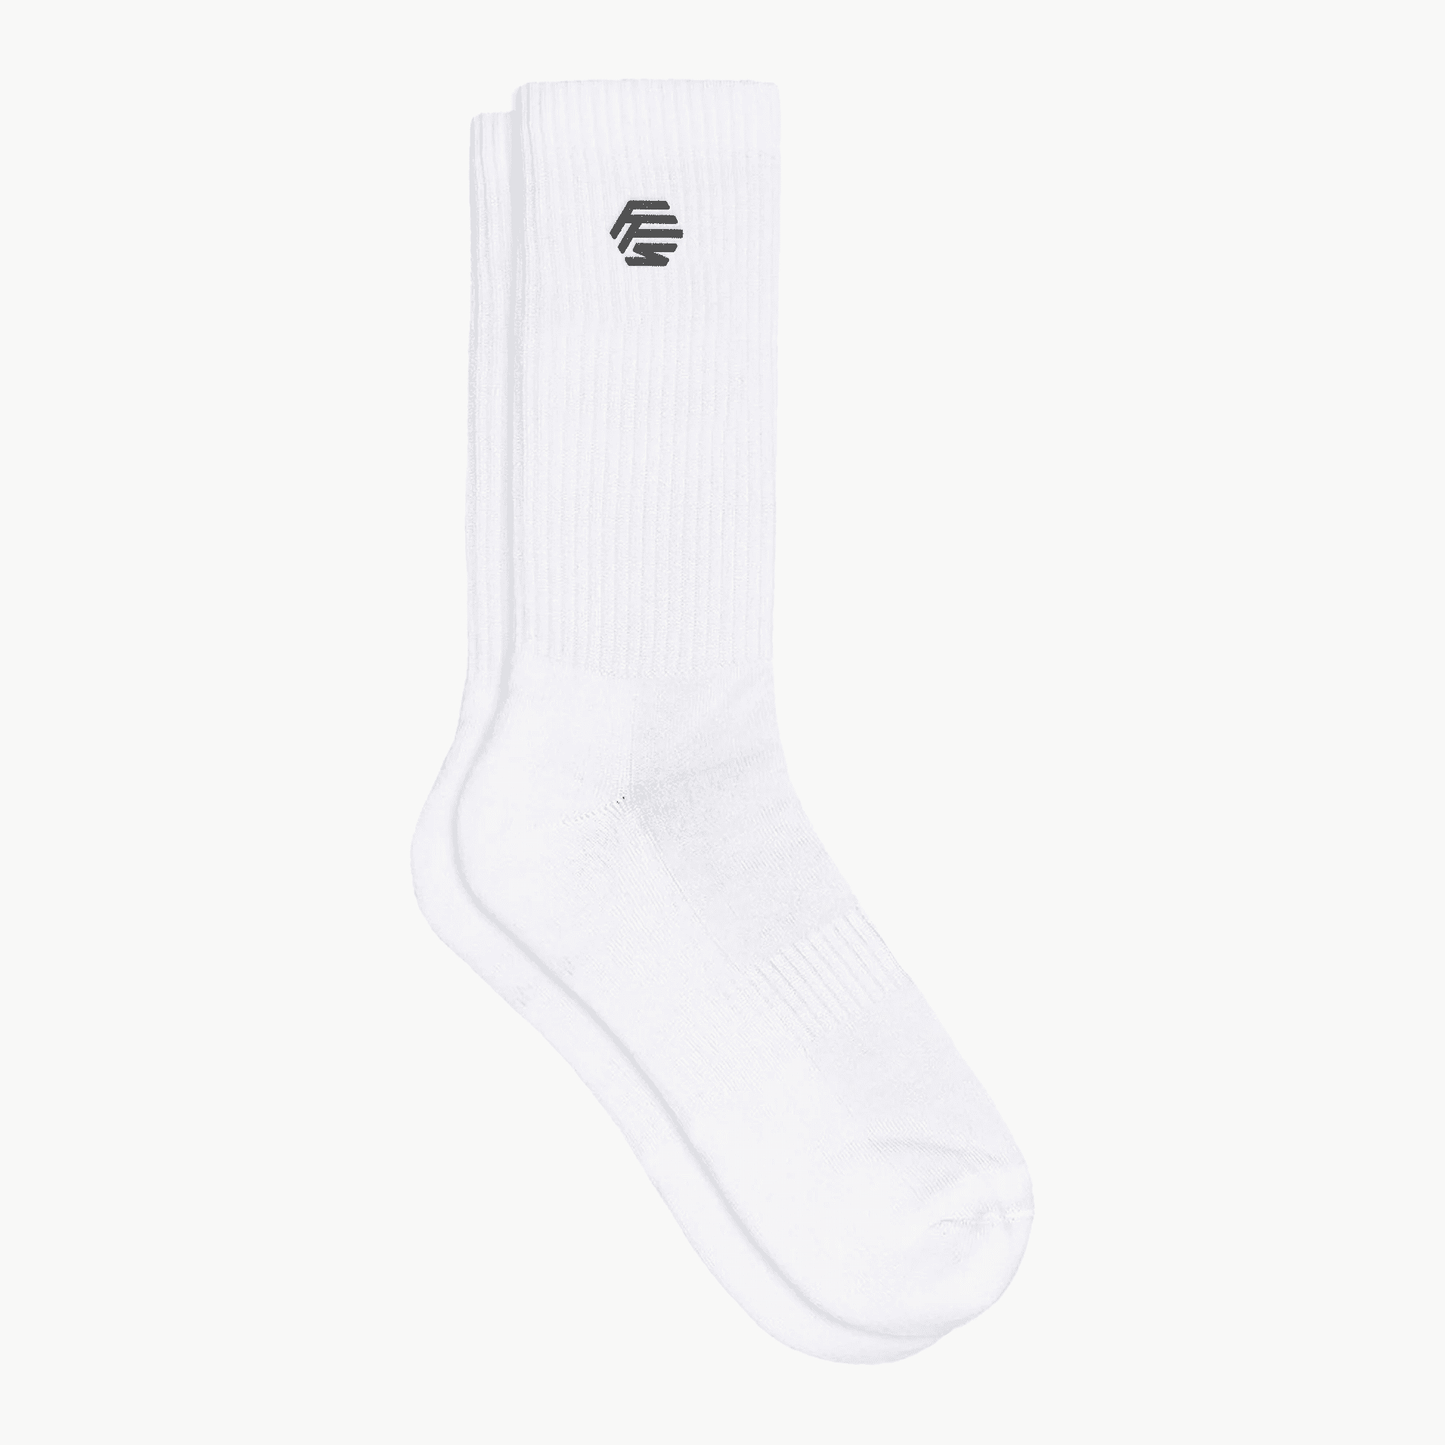 Flowers for Society Black Mud Socks white lateral view